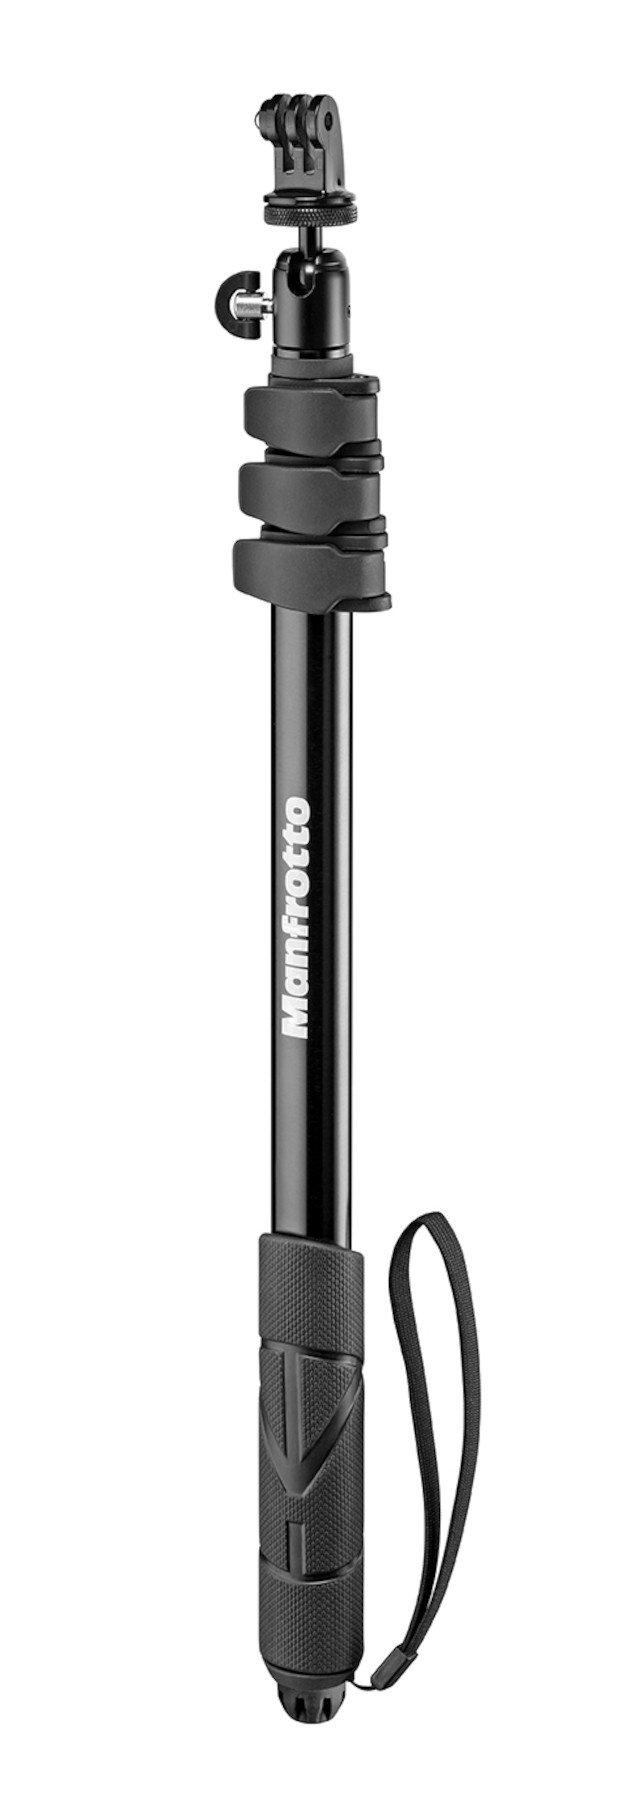 Manfrotto Compact Xtreme Black 2-in-1 (Monopod+Pole) (MPCOMPACT-BK)